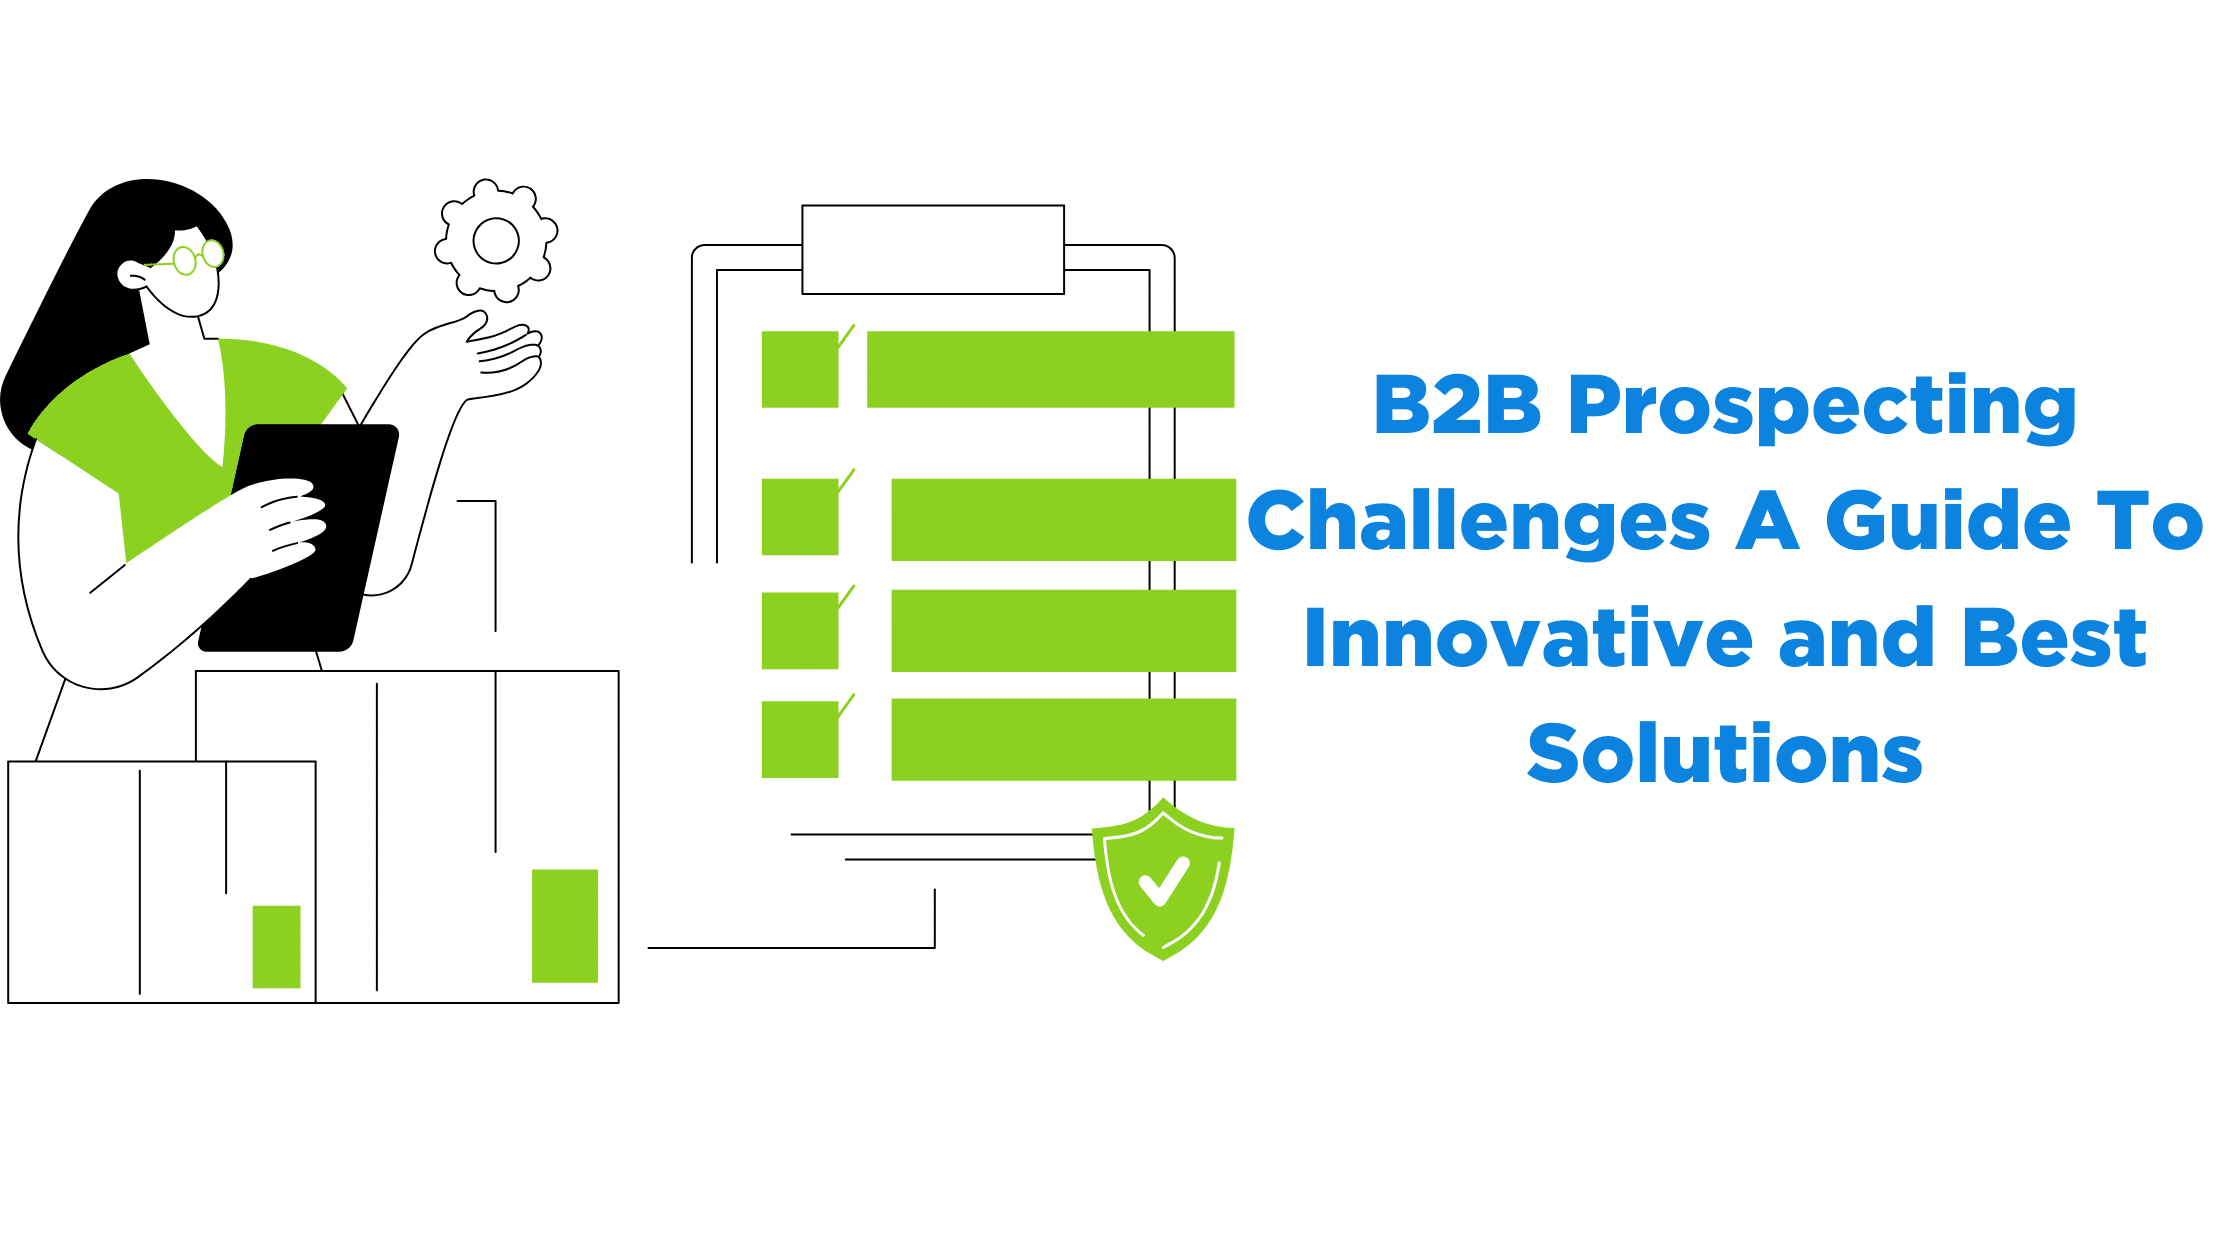 B2B Prospecting Challenges A Guide To Innovative and Best Solutions